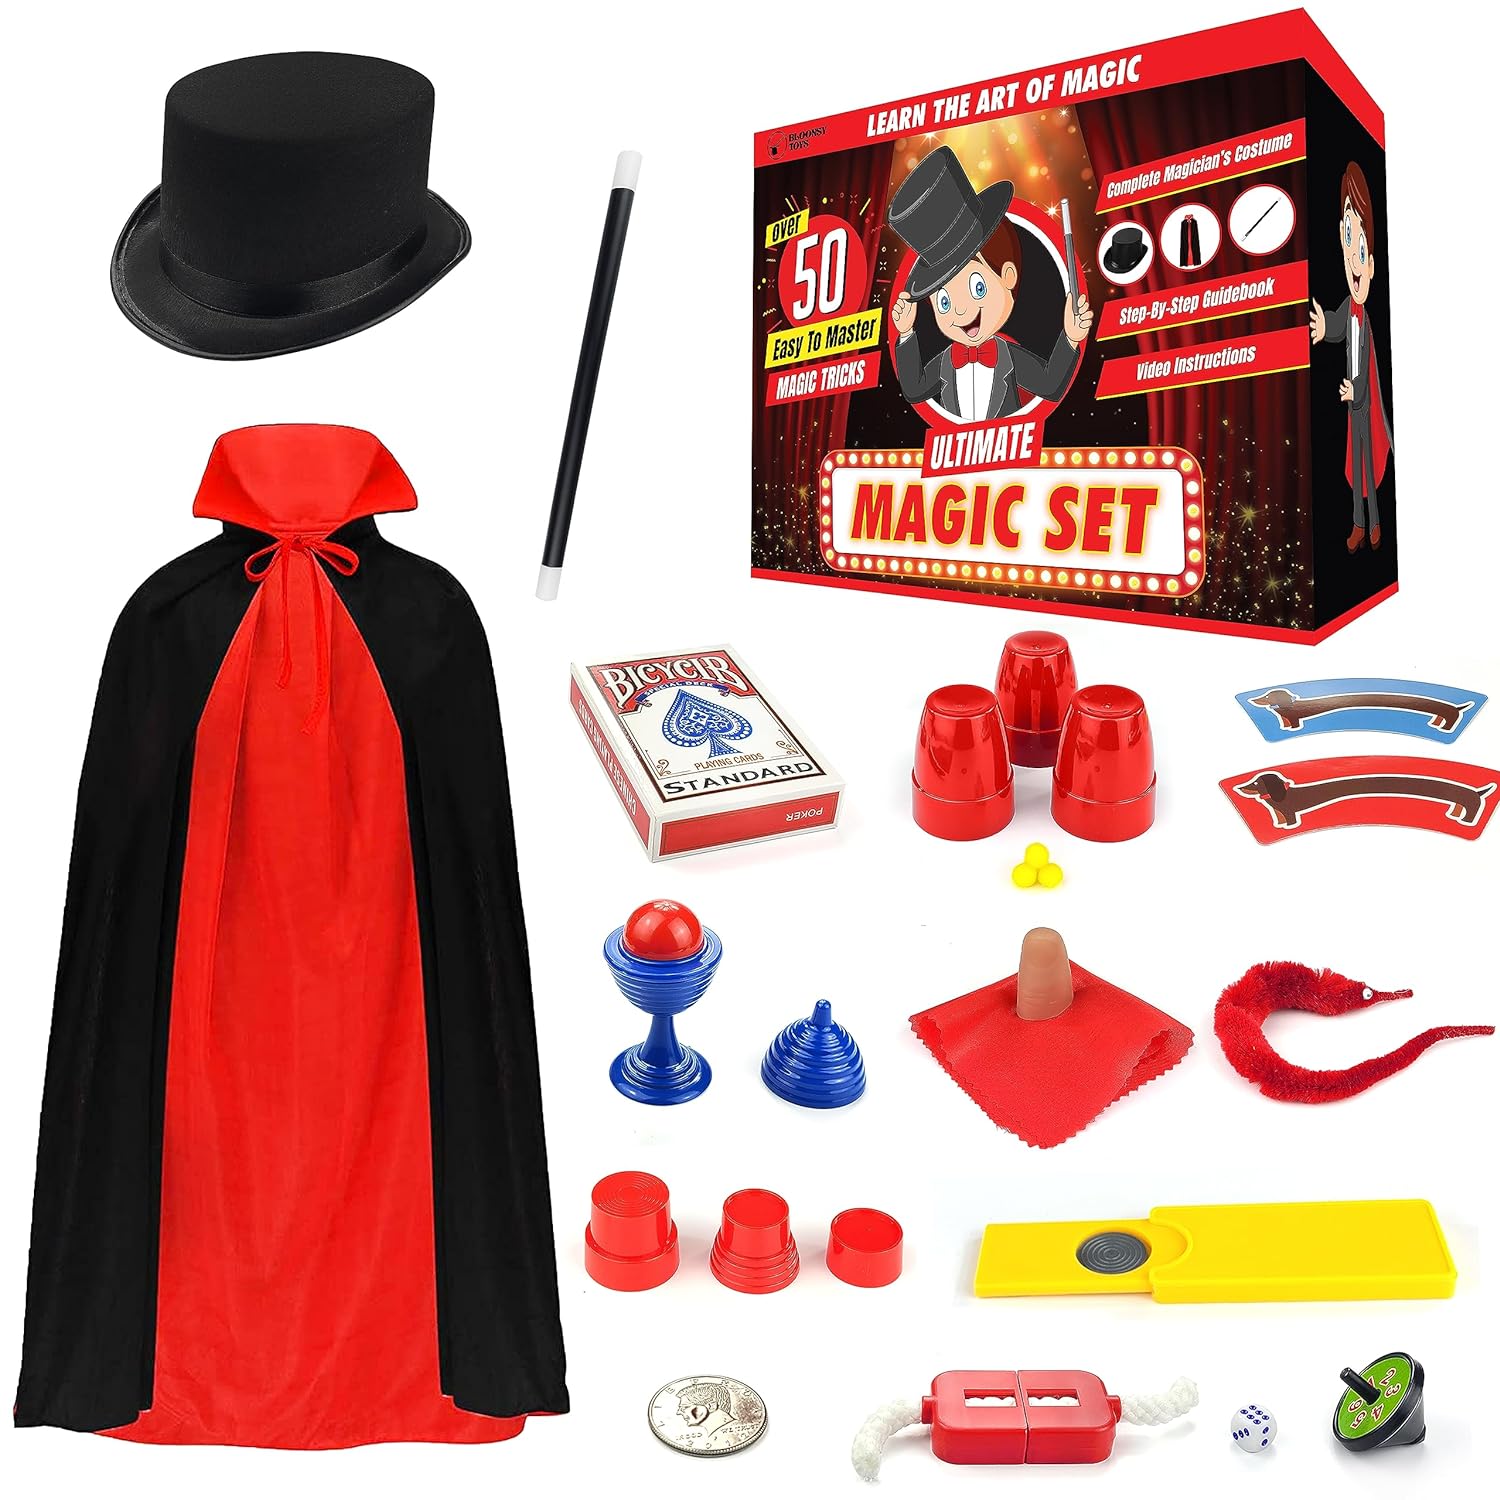 Bloonsy Magic Kit for Kids | Magic Tricks Set for Kids Age 6 8 10 12 | Magician Costume for Pretend Play with Easy to Follow Guide and Video